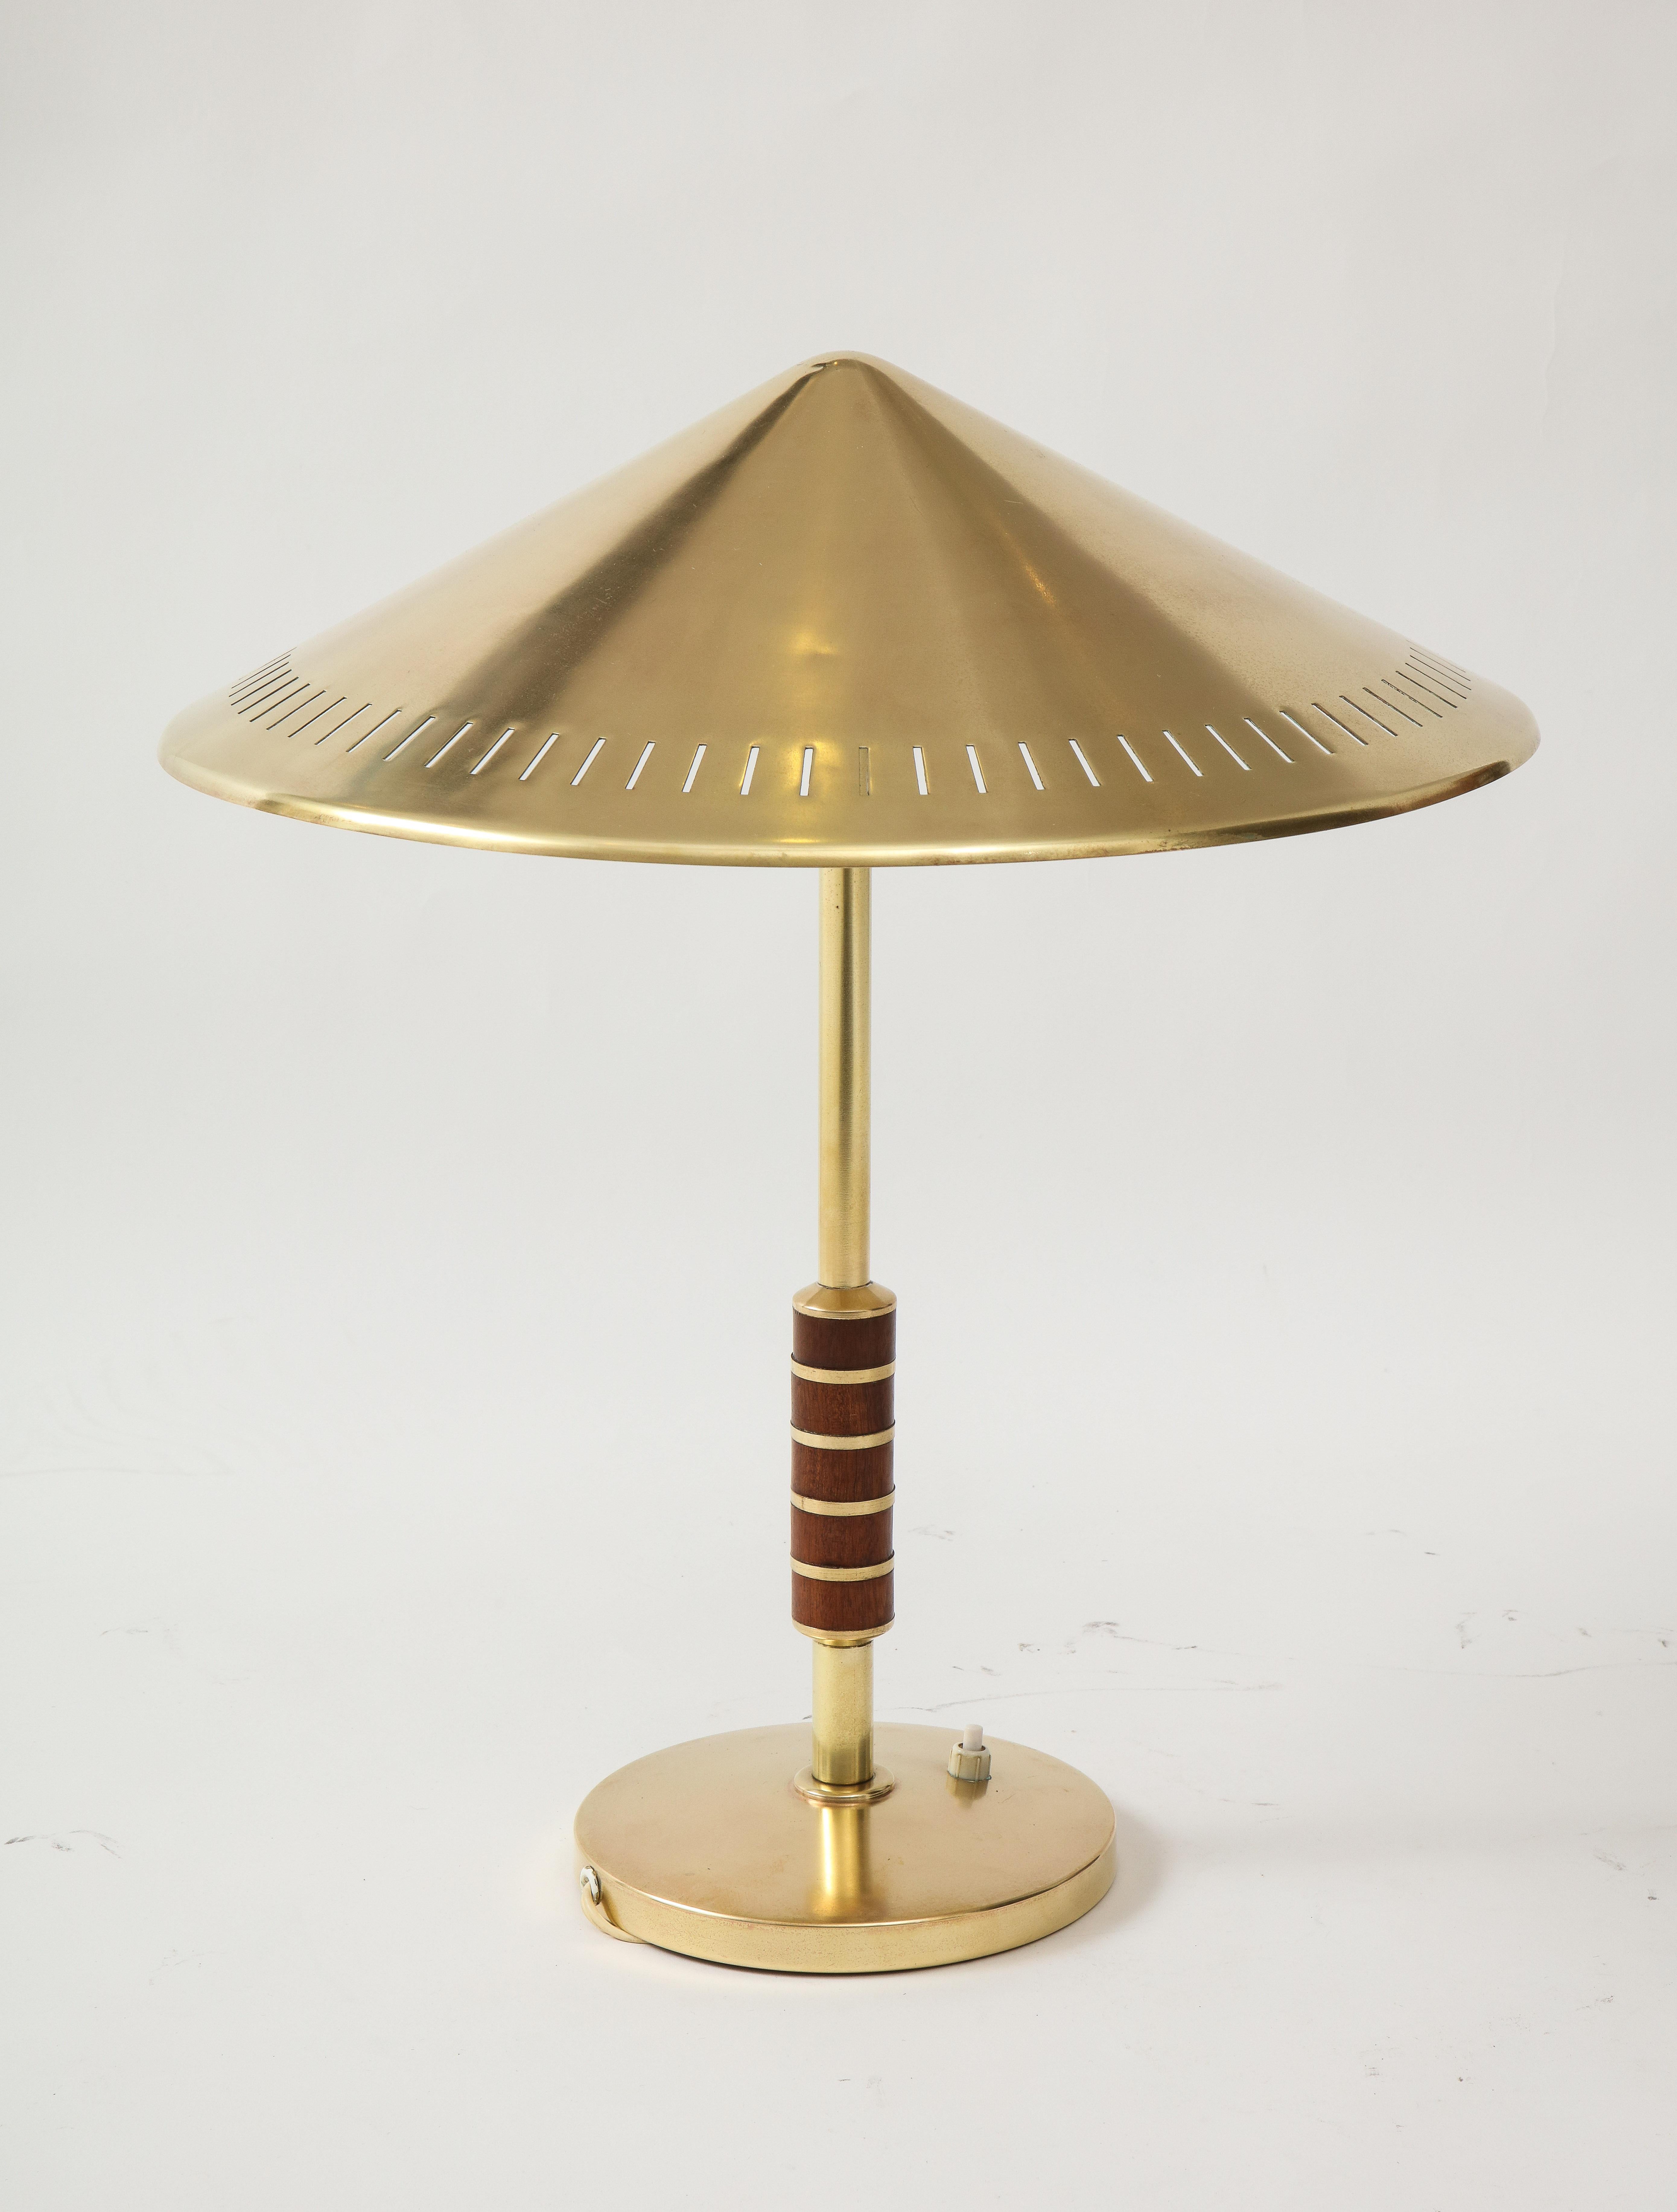 Mid-20th Century Danish Brass Table Lamp Produced by Lyfa 1956 and Designed by Bent Karlby